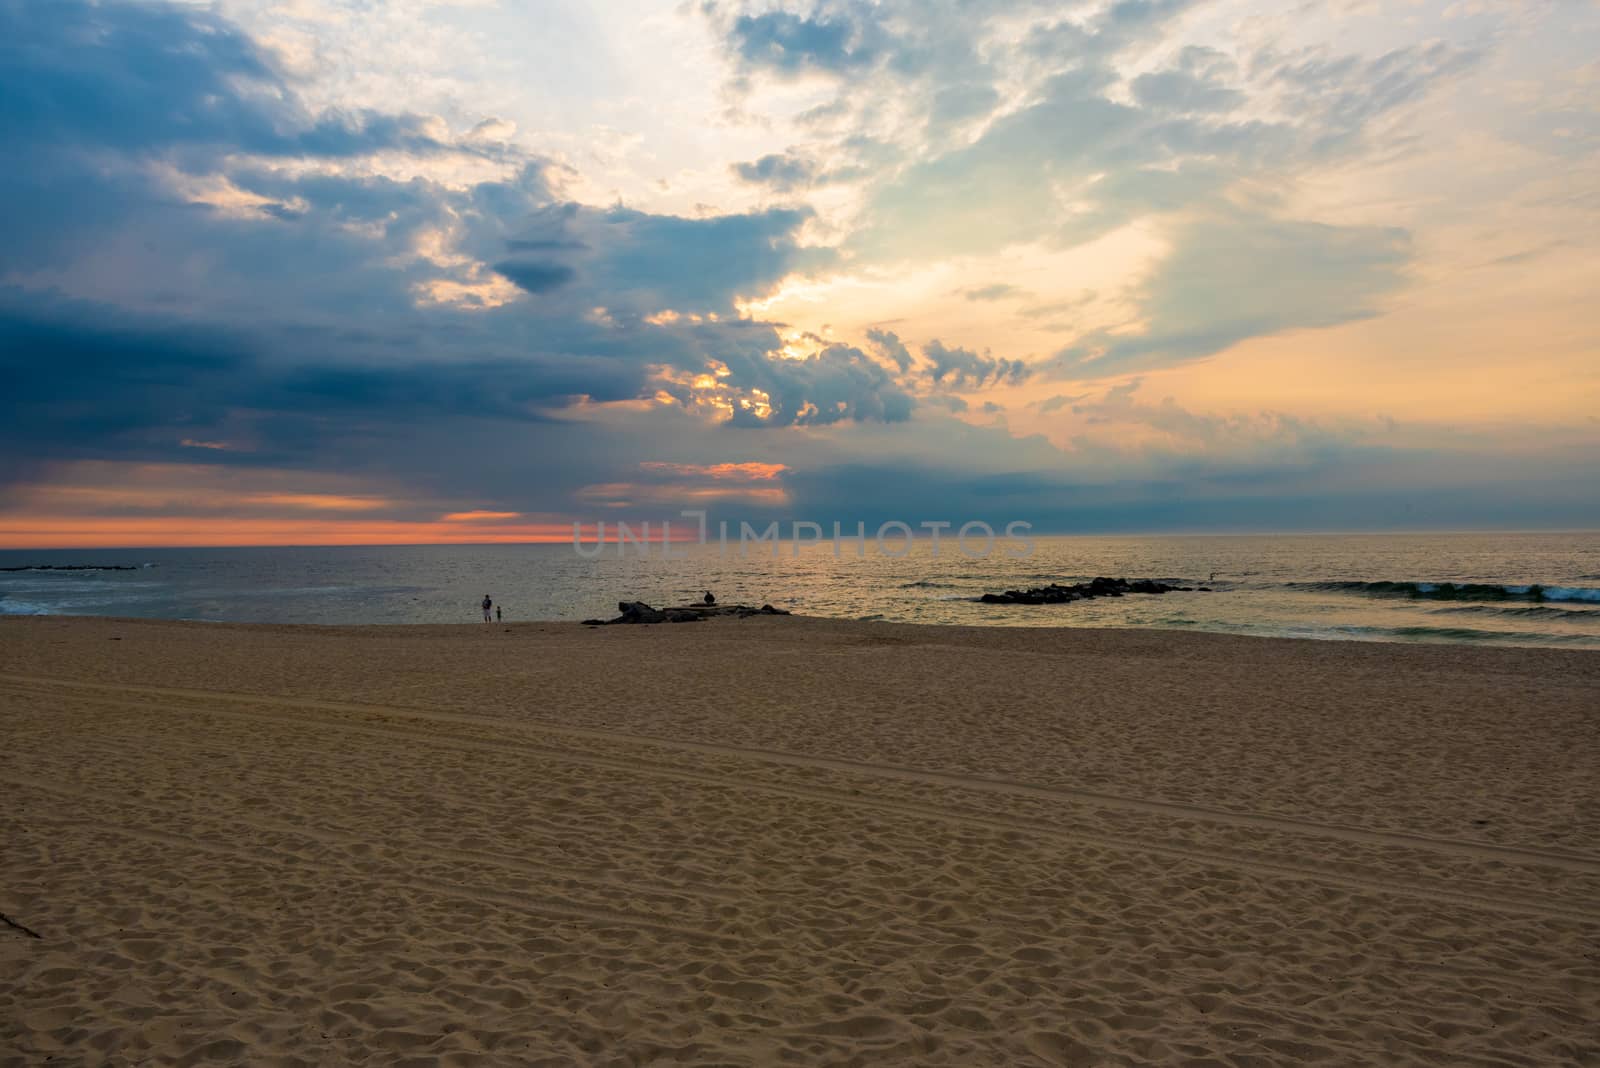 A wide angle photo of a beautiful sunrise over the Atlantic Ocean in Spring Lake, NJ on the 4th of July.